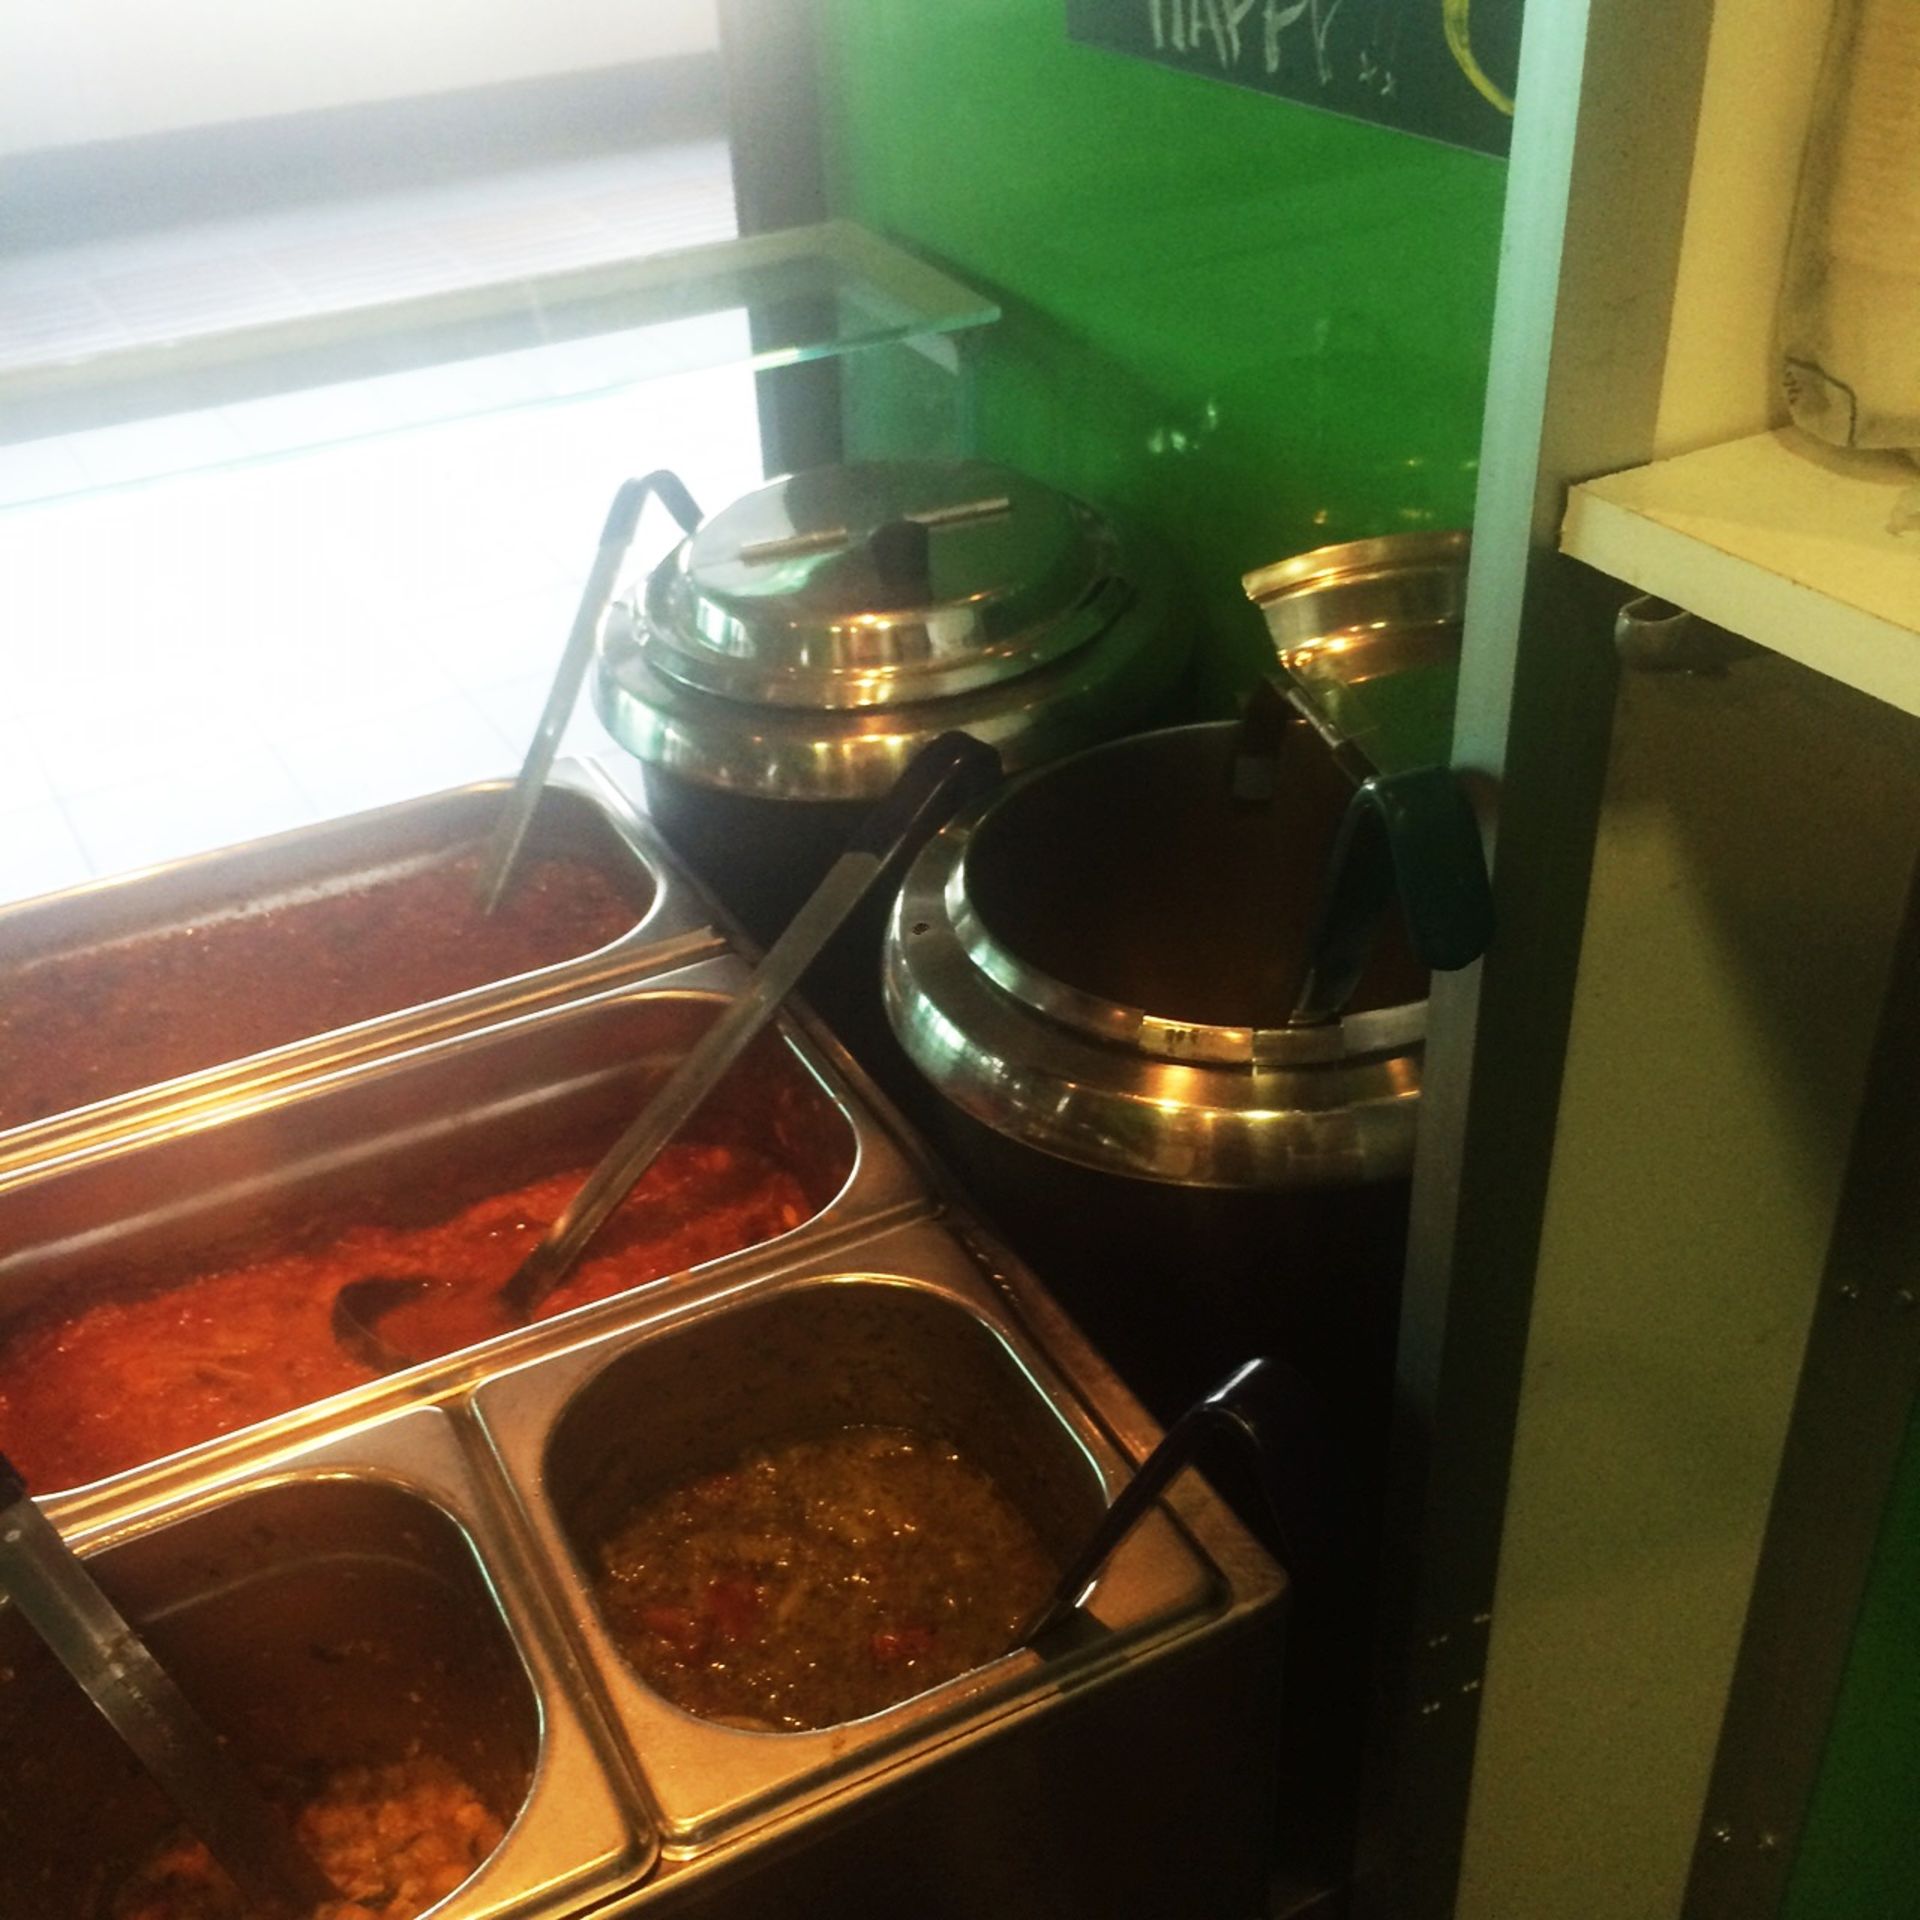 AJC Retail Solutions - Stewed Food and Coffee Kiosk - Complete Business Opportunity! - Image 8 of 25